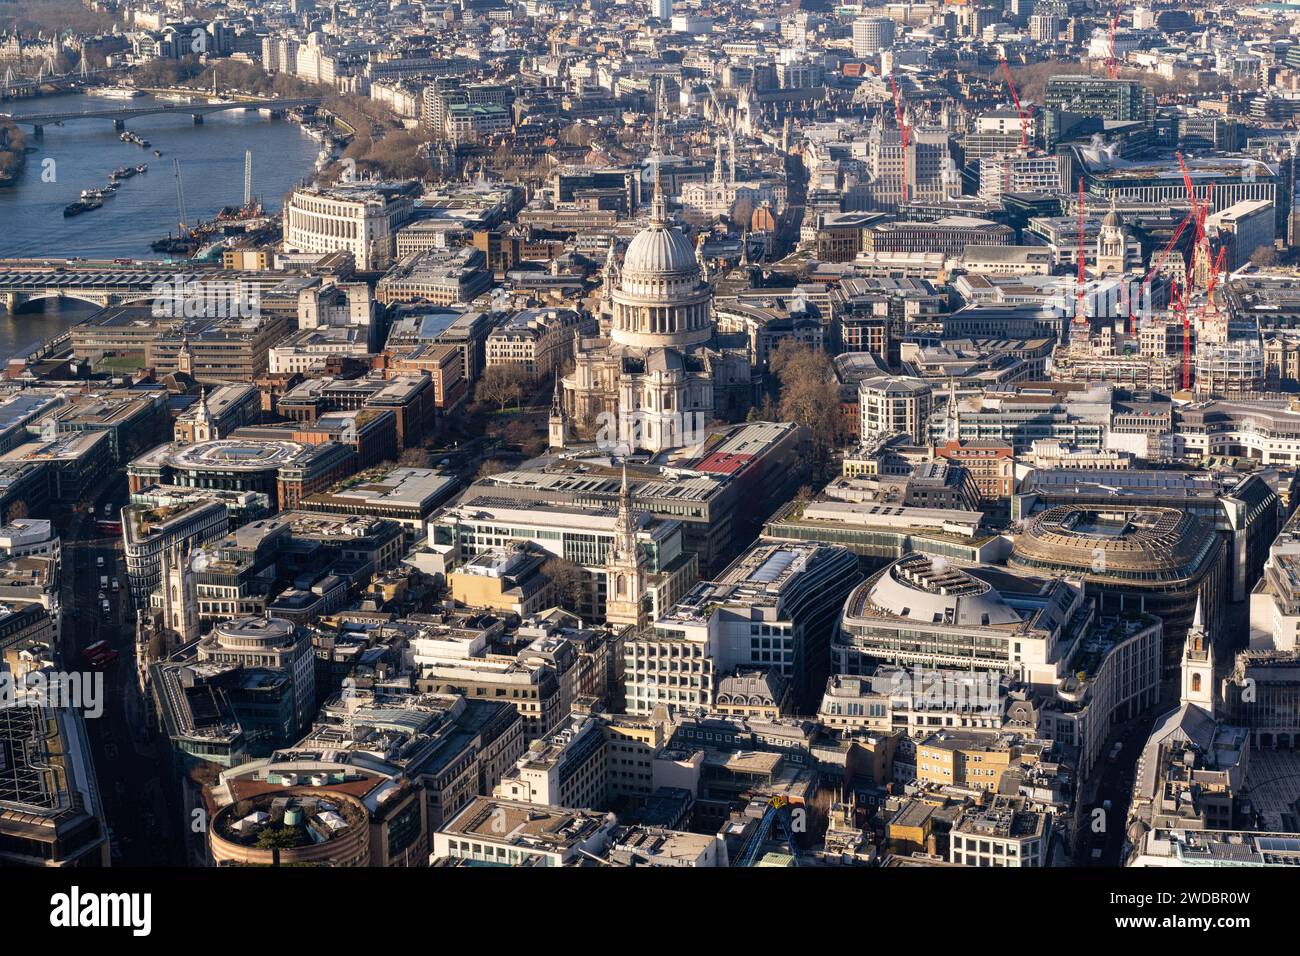 The City of London is a historic financial district. Modern corporate skyscrapers tower above the vestiges of medieval alleyways below Stock Photo